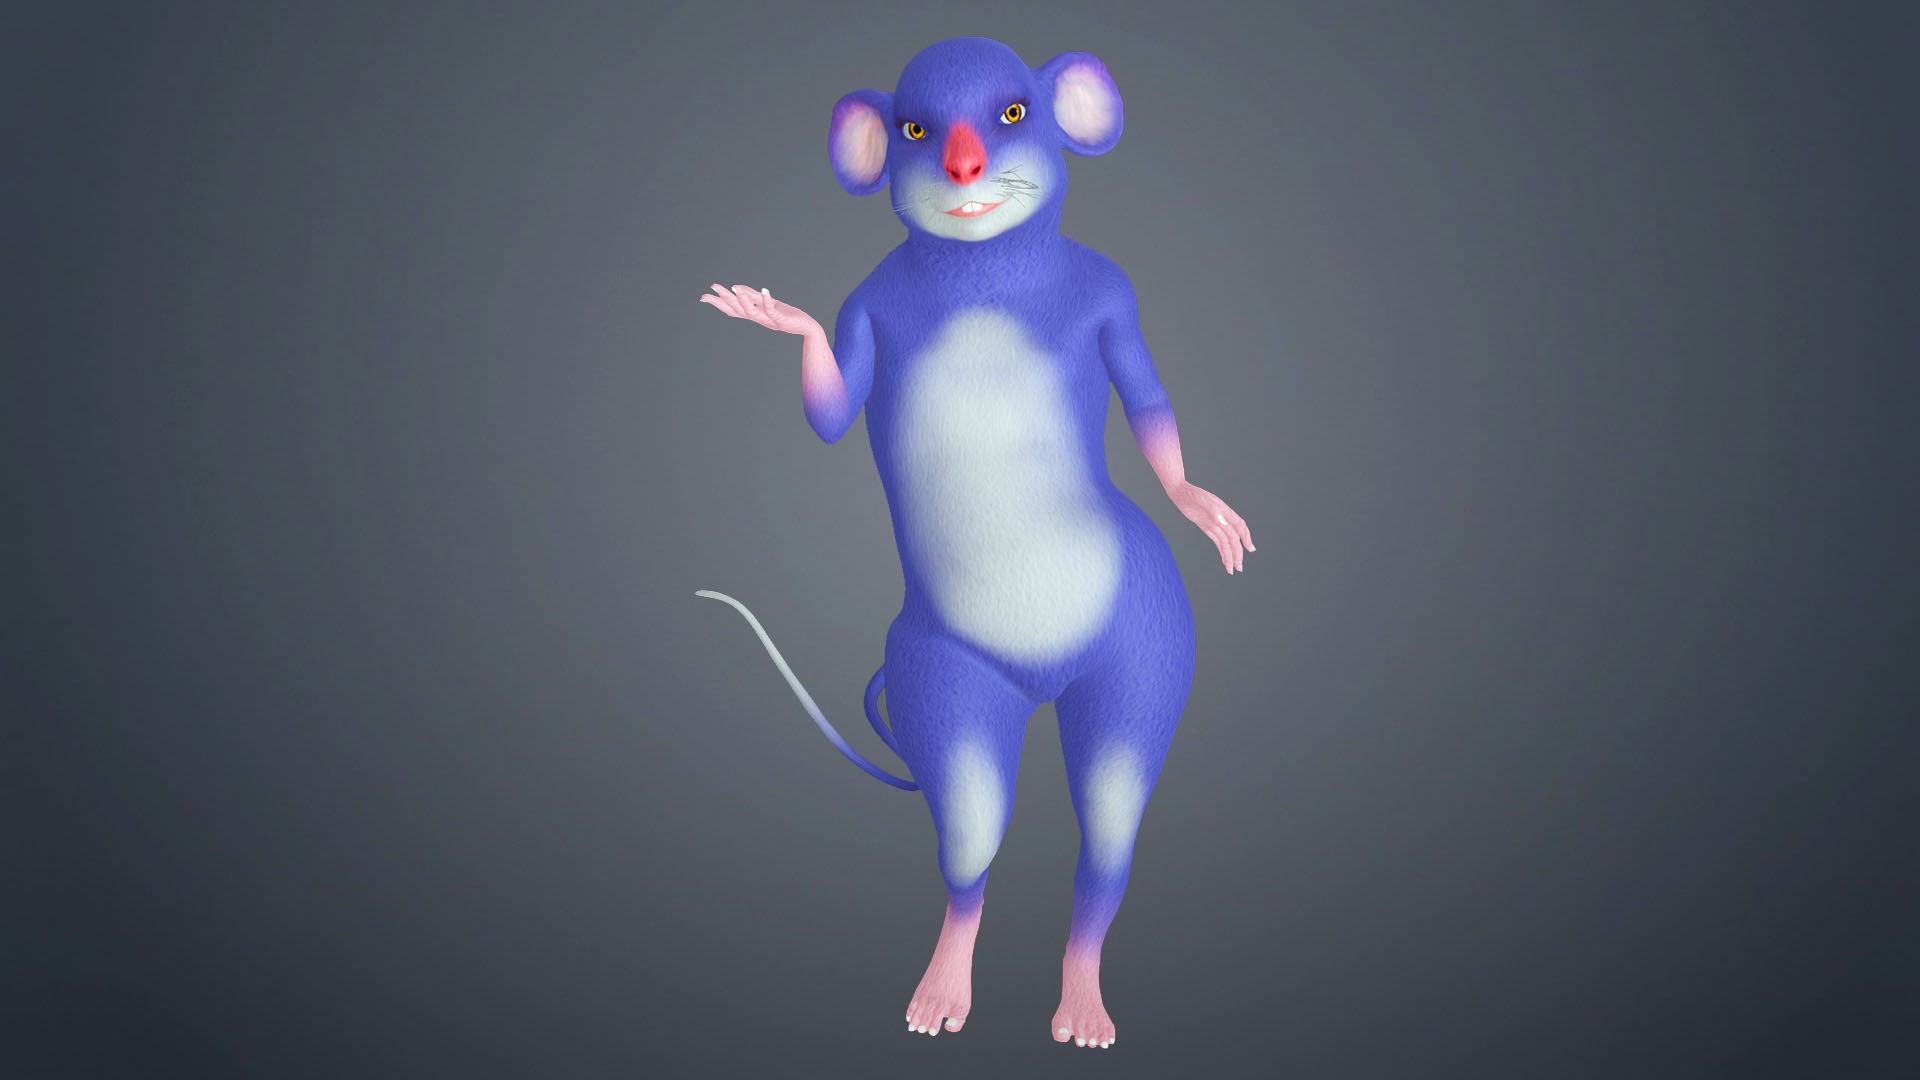 Cartoon Mouse - Rat Human Rigged Character 3D - TurboSquid 1854088